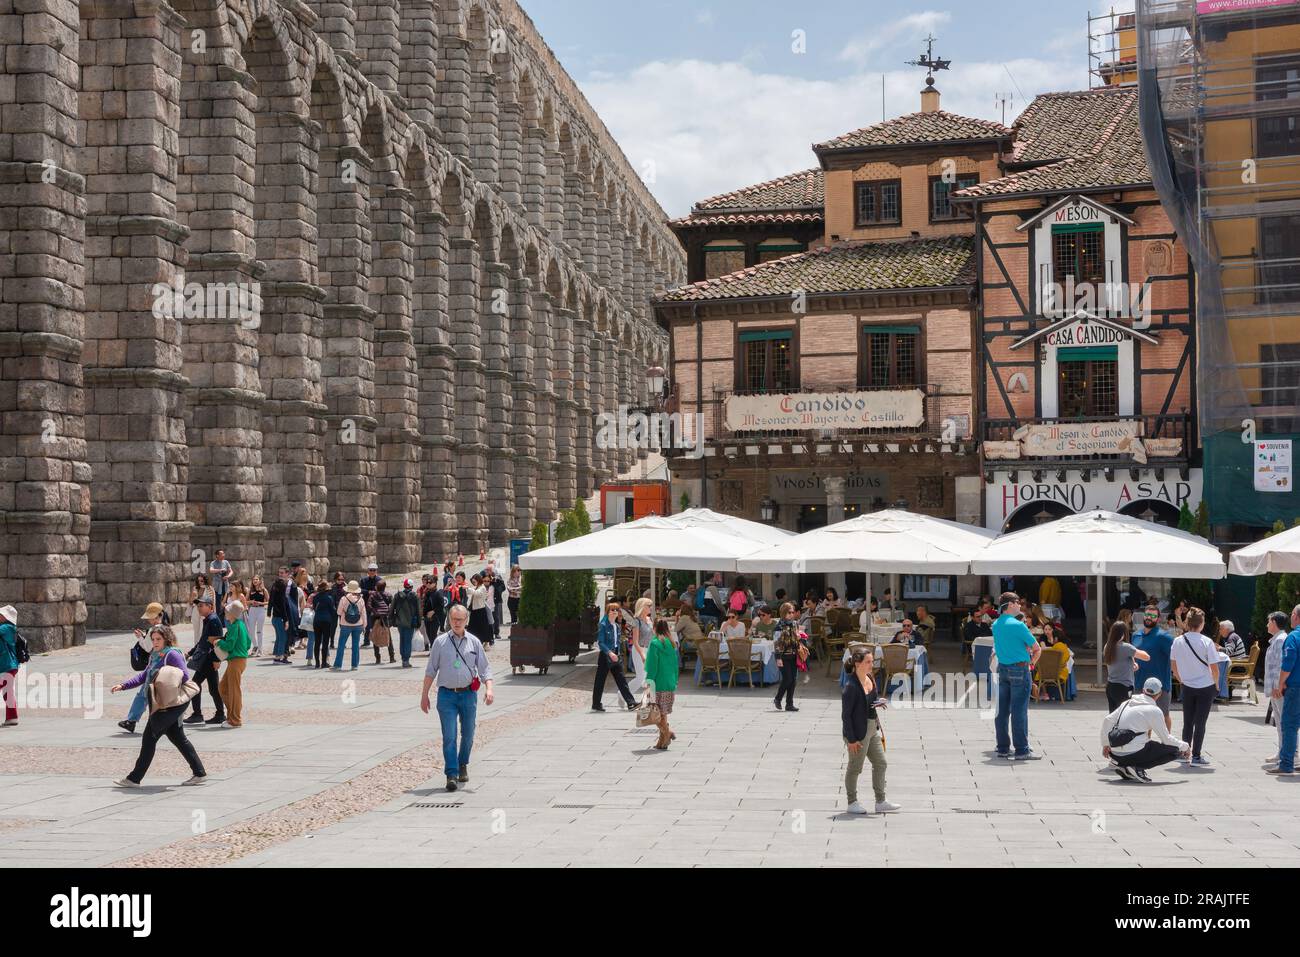 Segovia Spain, view in summer of the Plaza del Azoguelo and the magnificent 1st Century AD Roman aqueduct in the centre of the city of Segovia, Spain Stock Photo